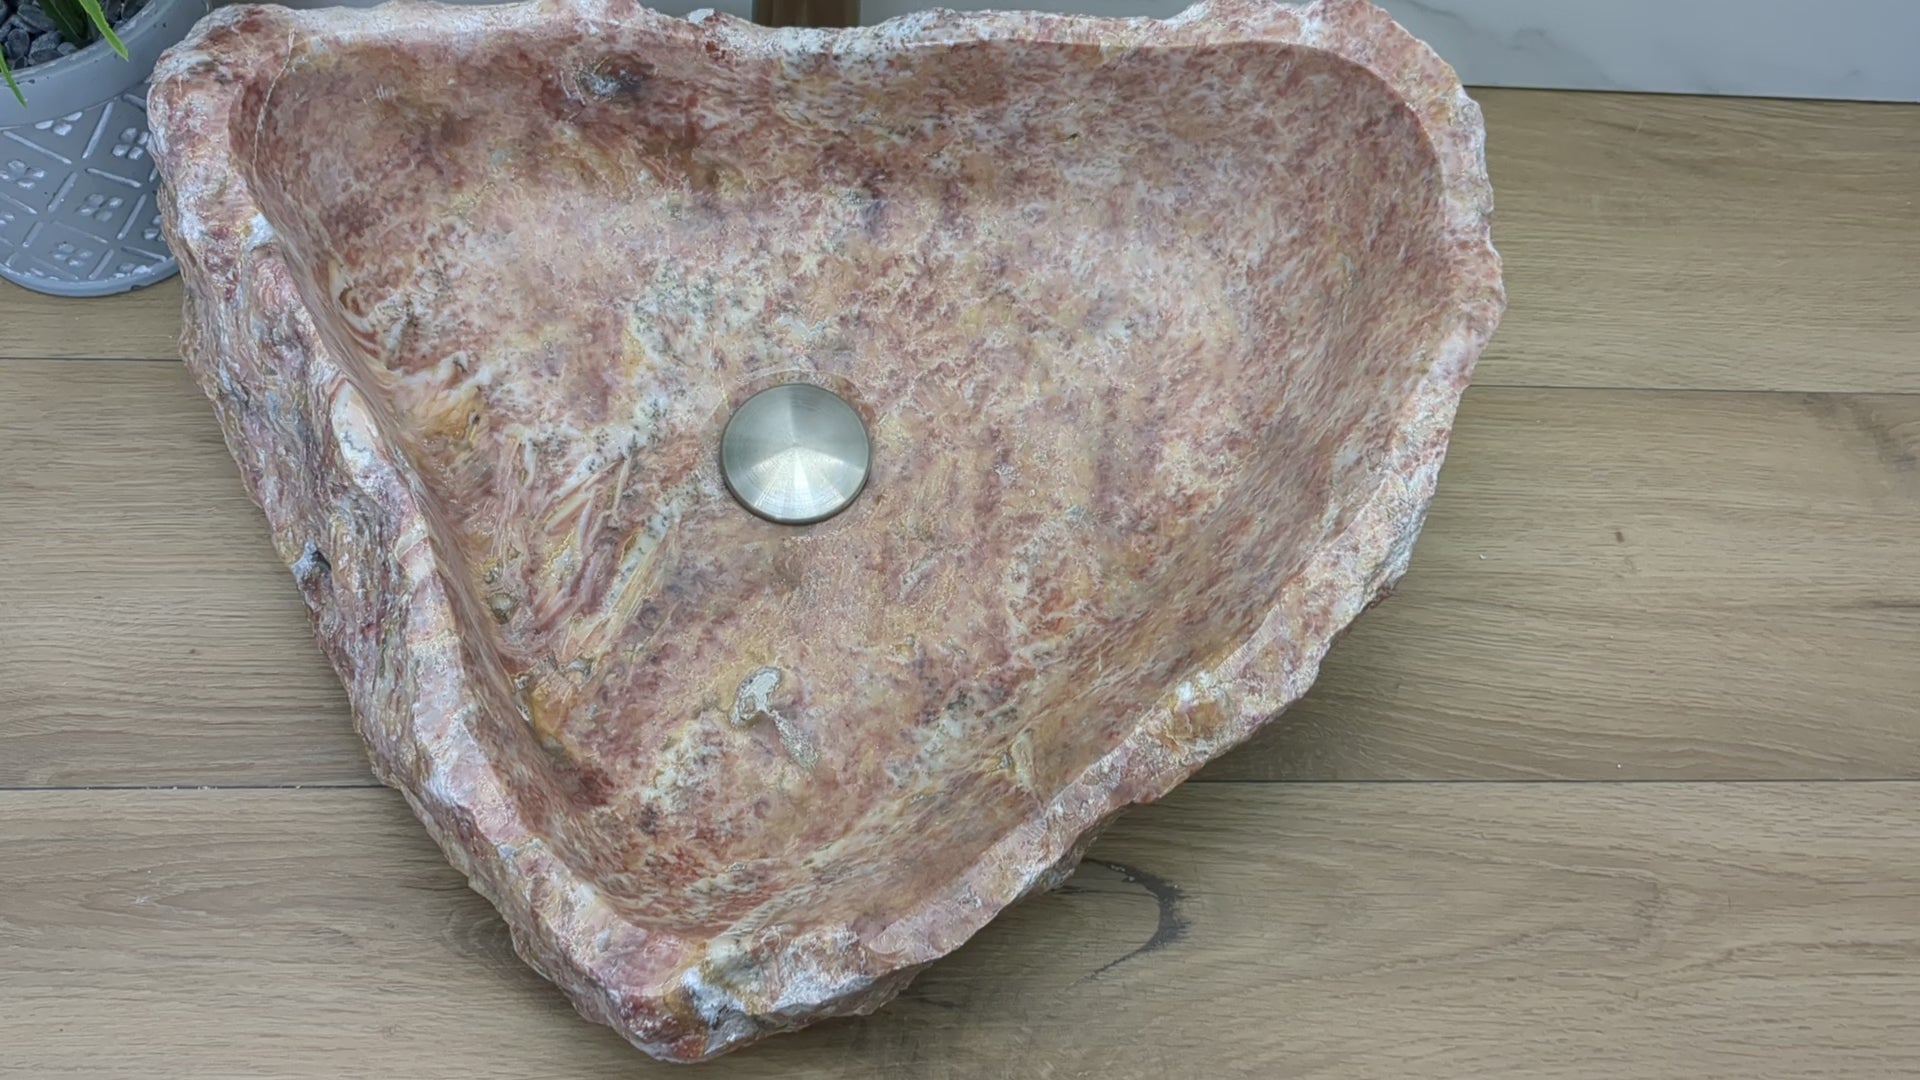 Pink and Tan Onyx Vessel Sink. Handmade in Mexico. We hand finish, package, and ship from the USA. Buy now at www.felipeandgrace.com. 